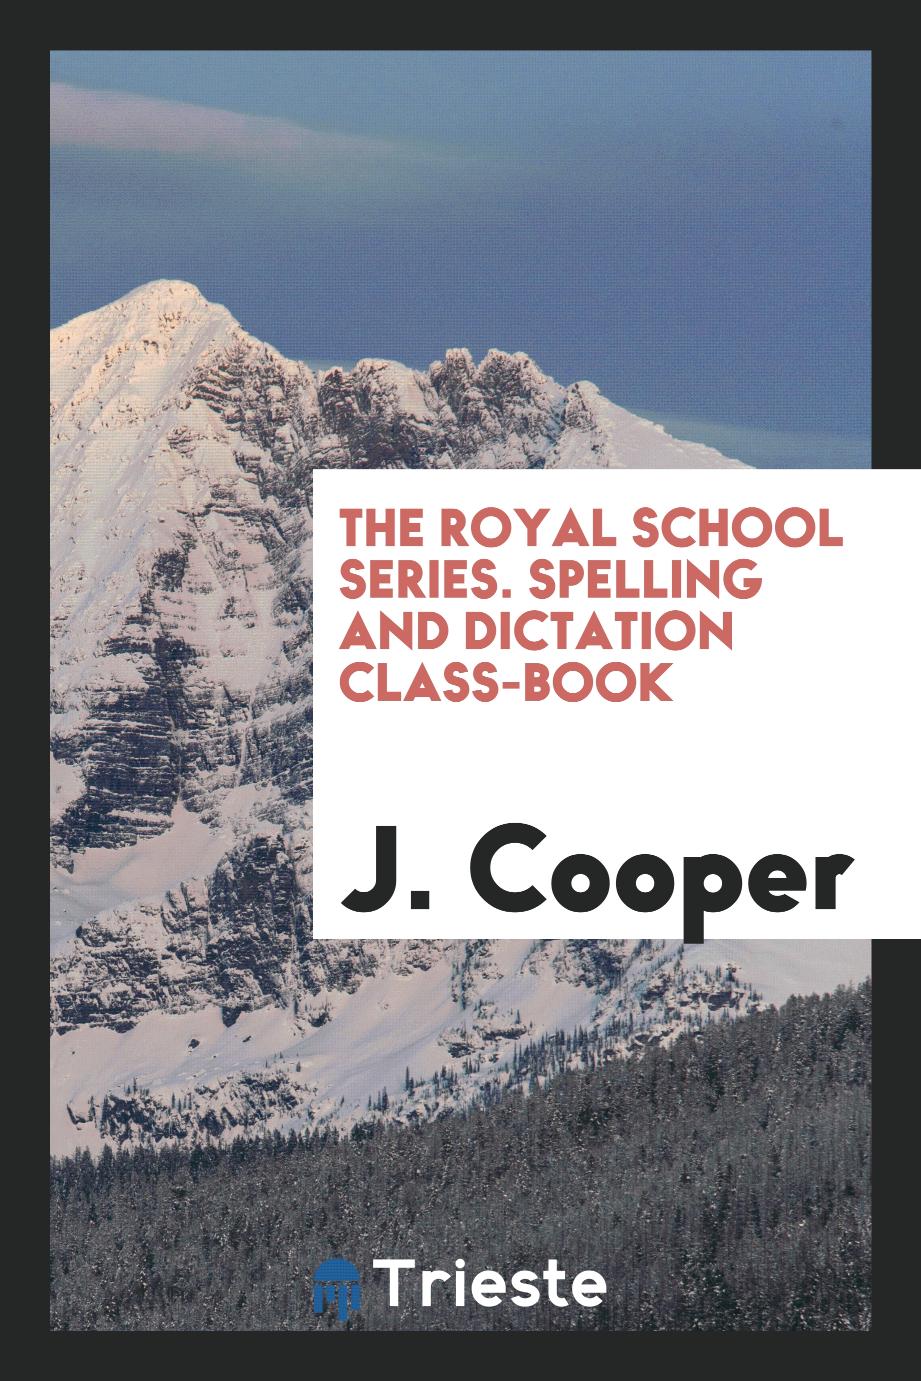 The Royal School Series. Spelling and Dictation Class-Book